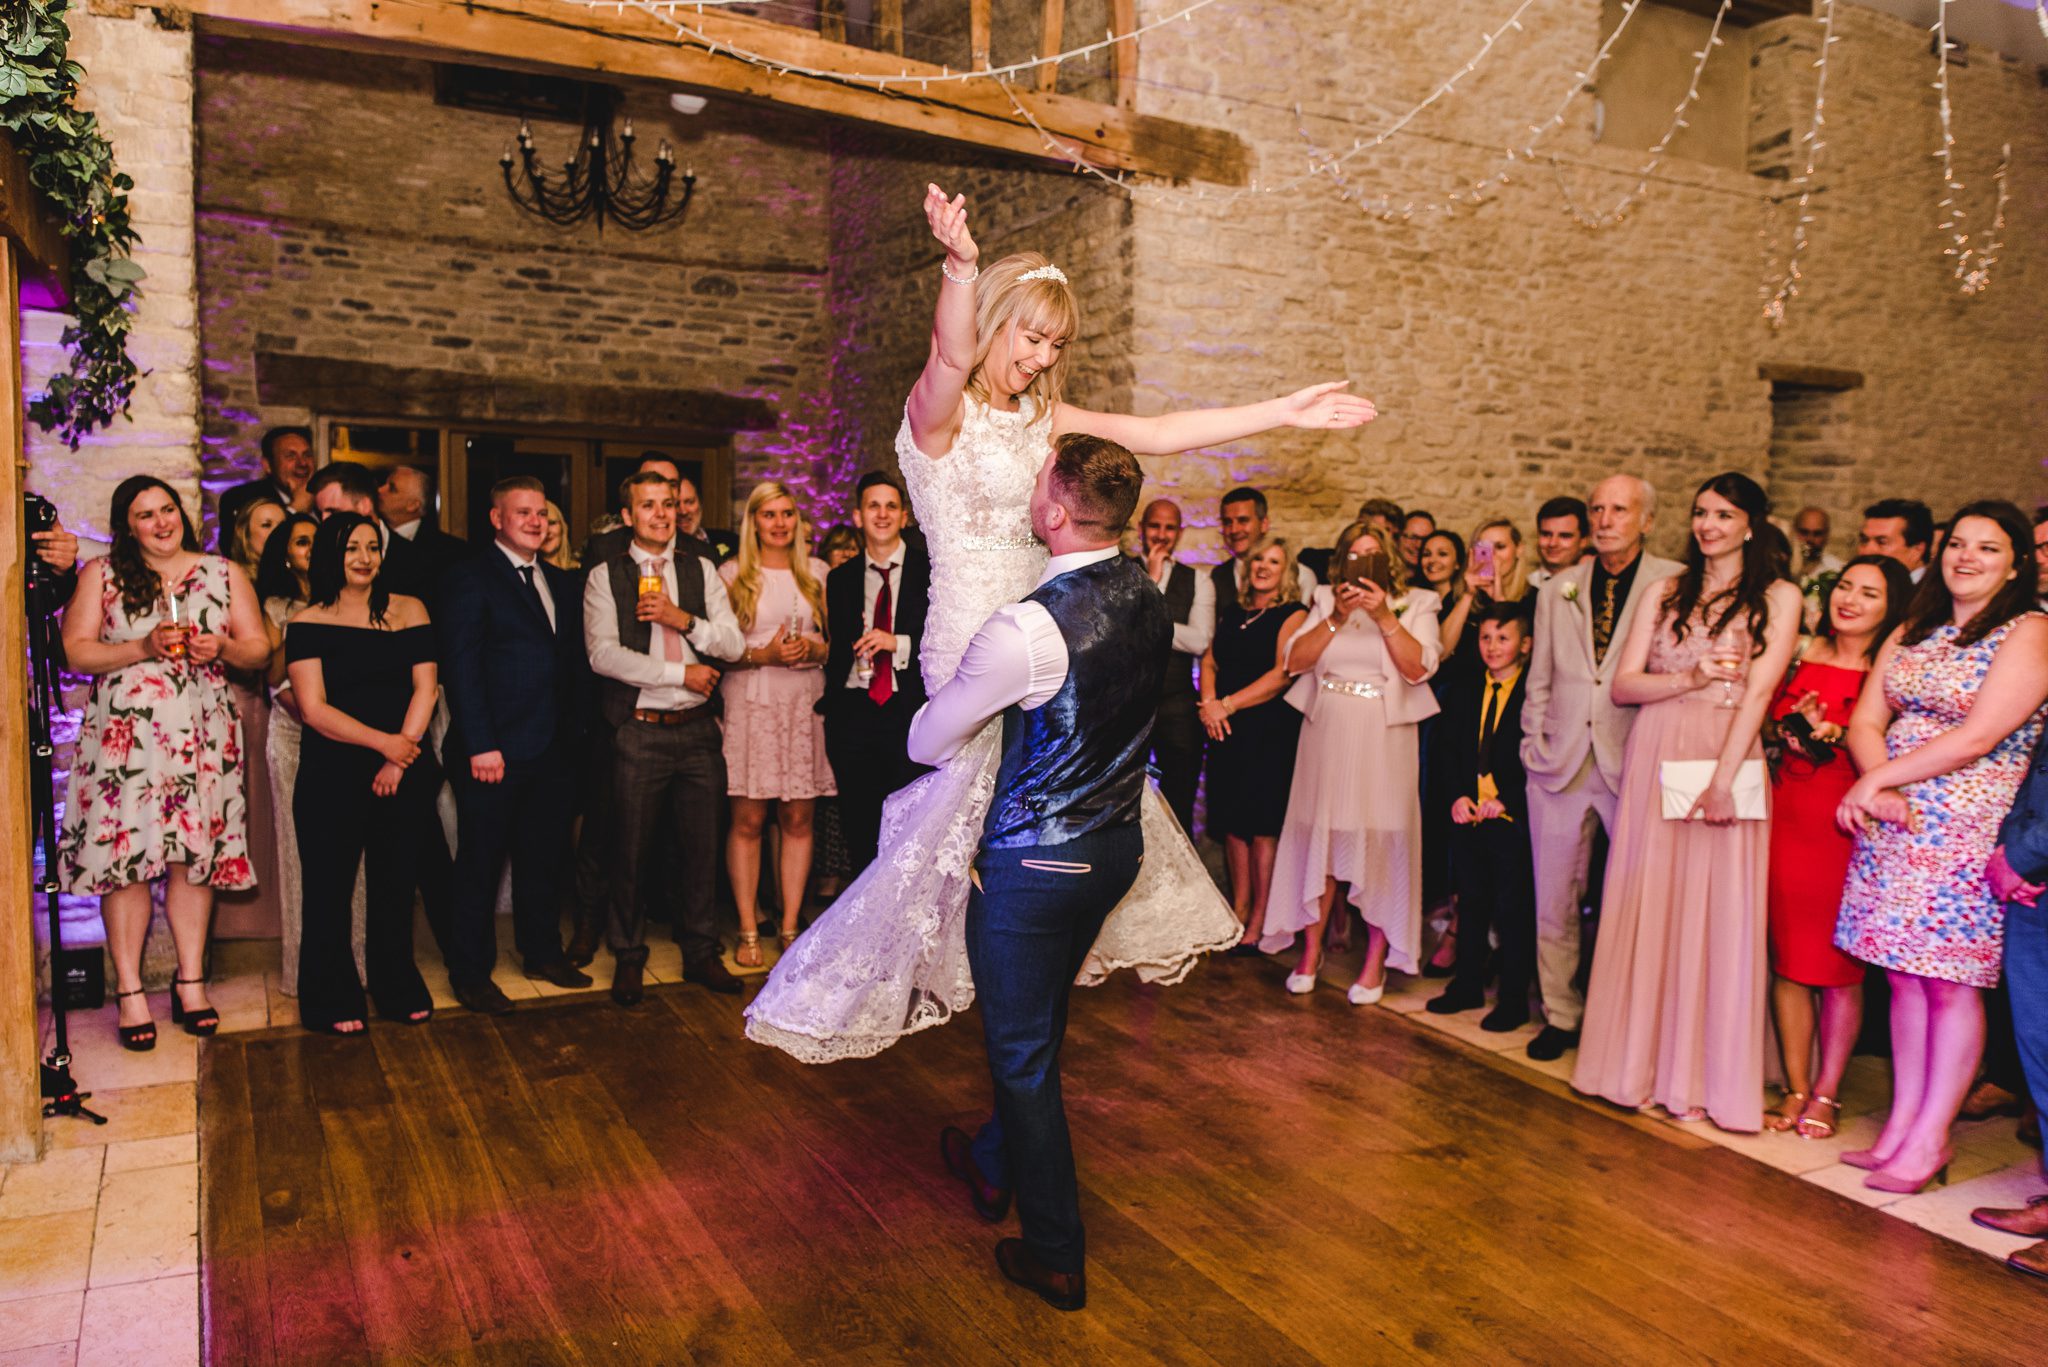 Groom lifting his bride up during their first dance at Kingscote Barn